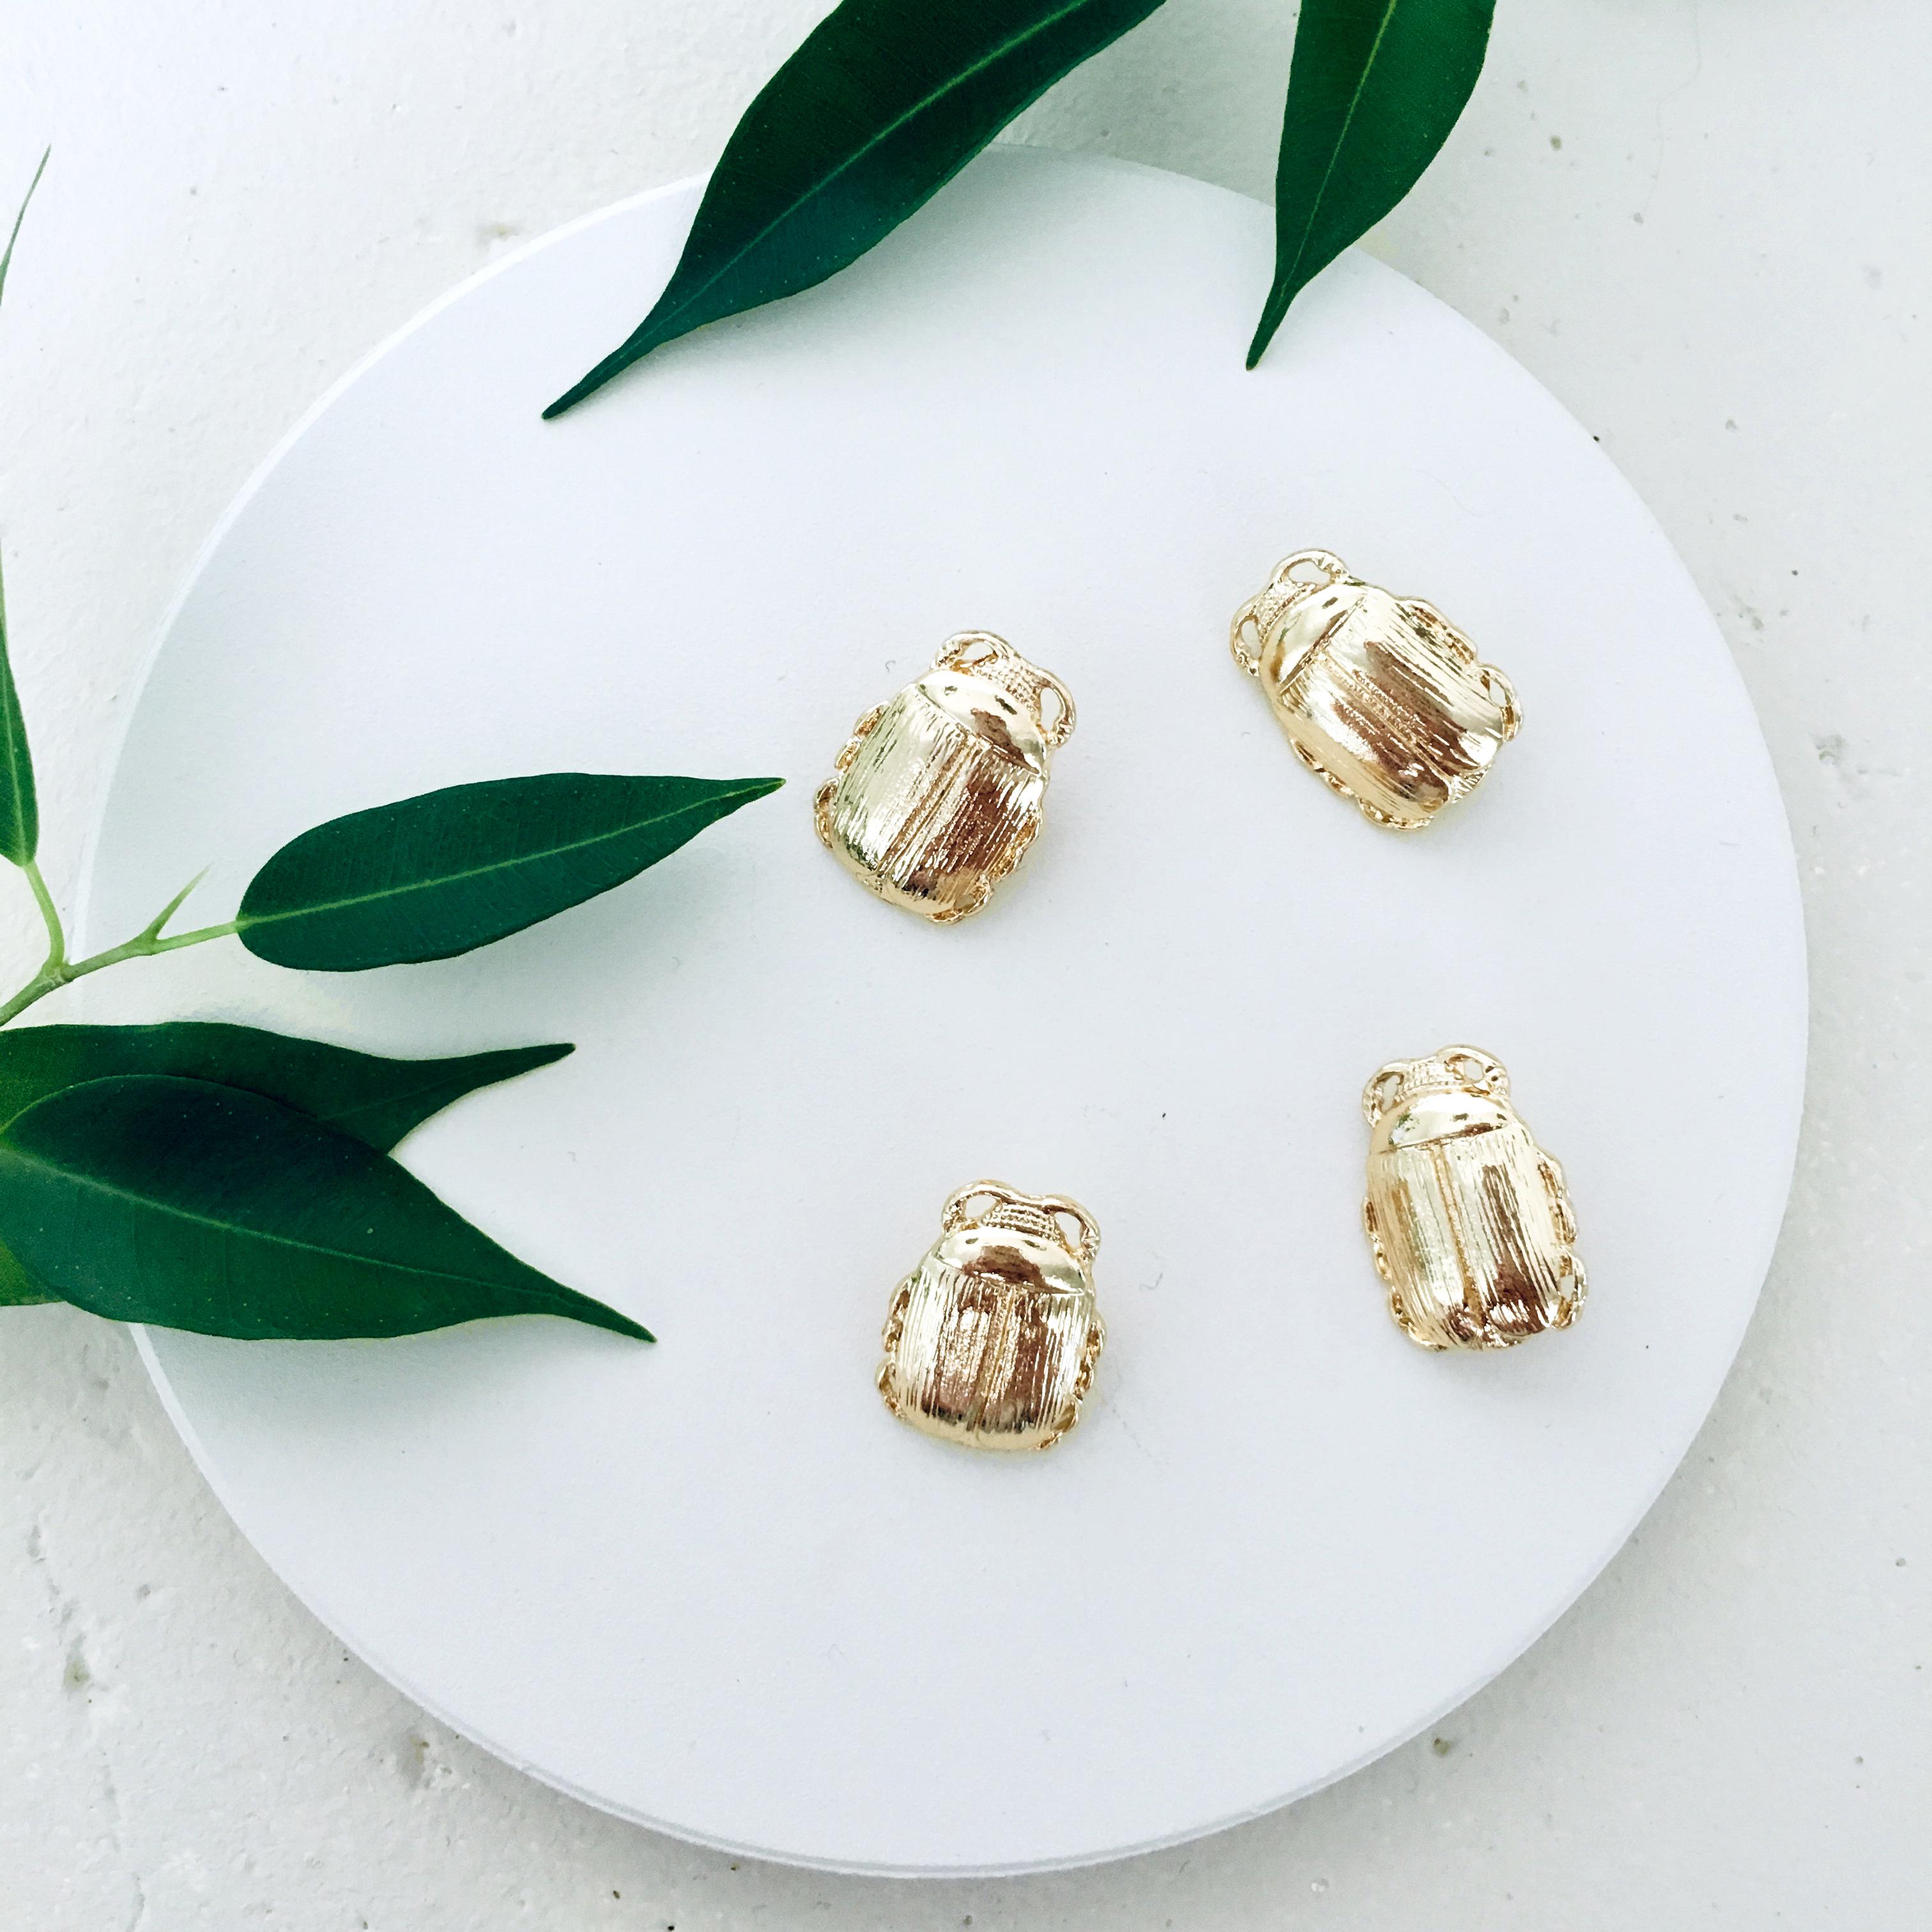 Menagerie - Gold Beetle Buttons